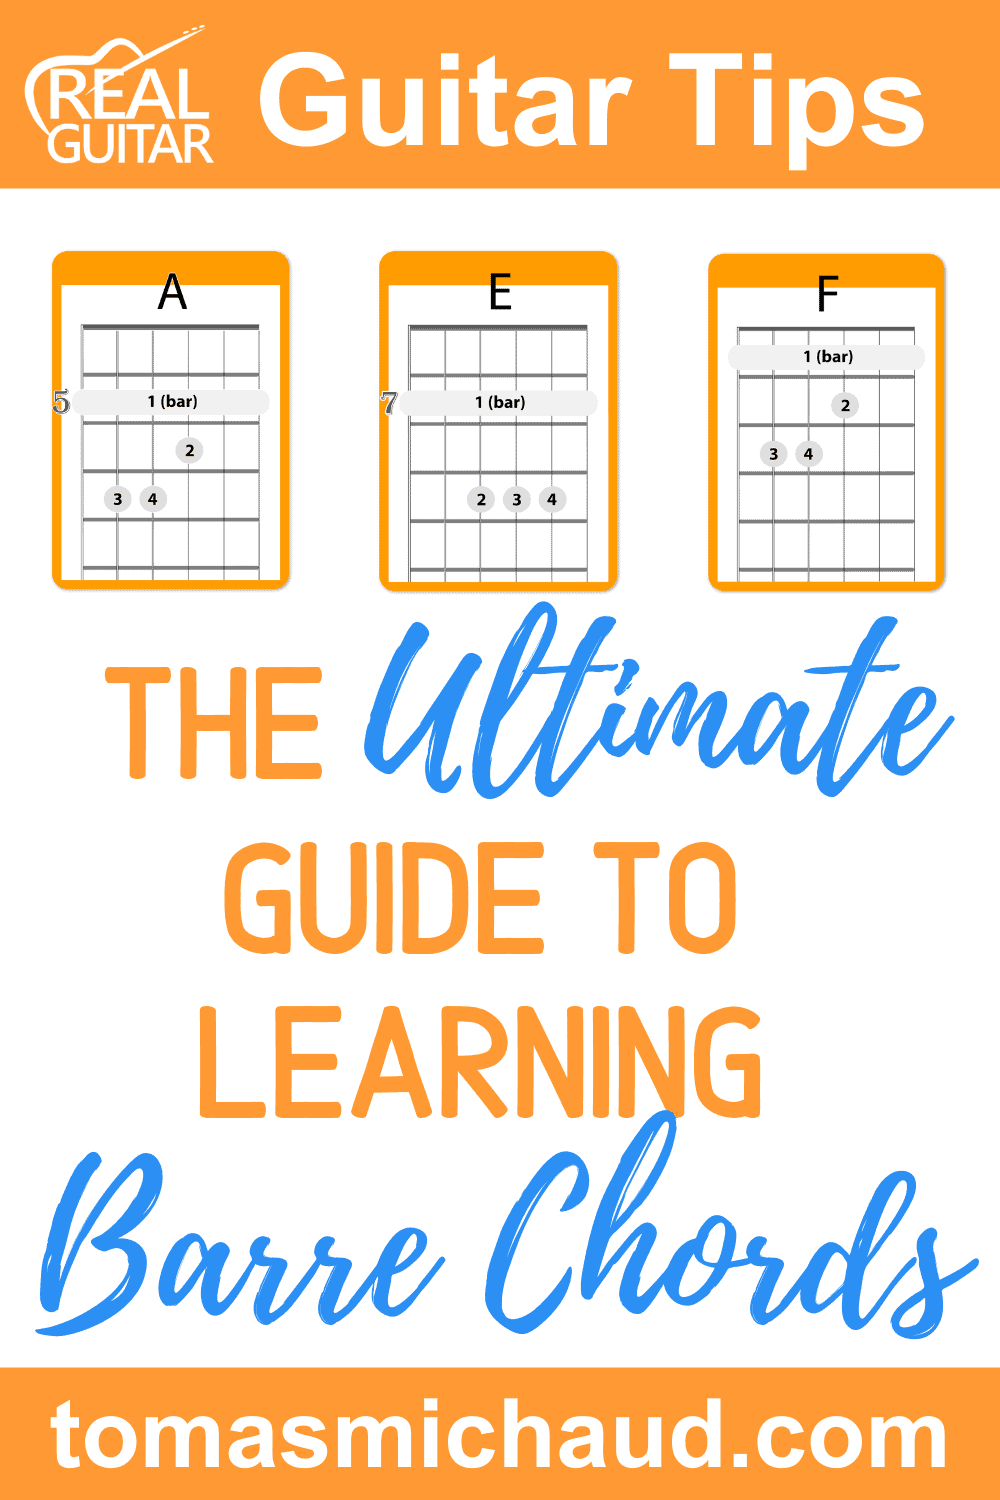 The Ultimate Guide to Learning Barre Chords